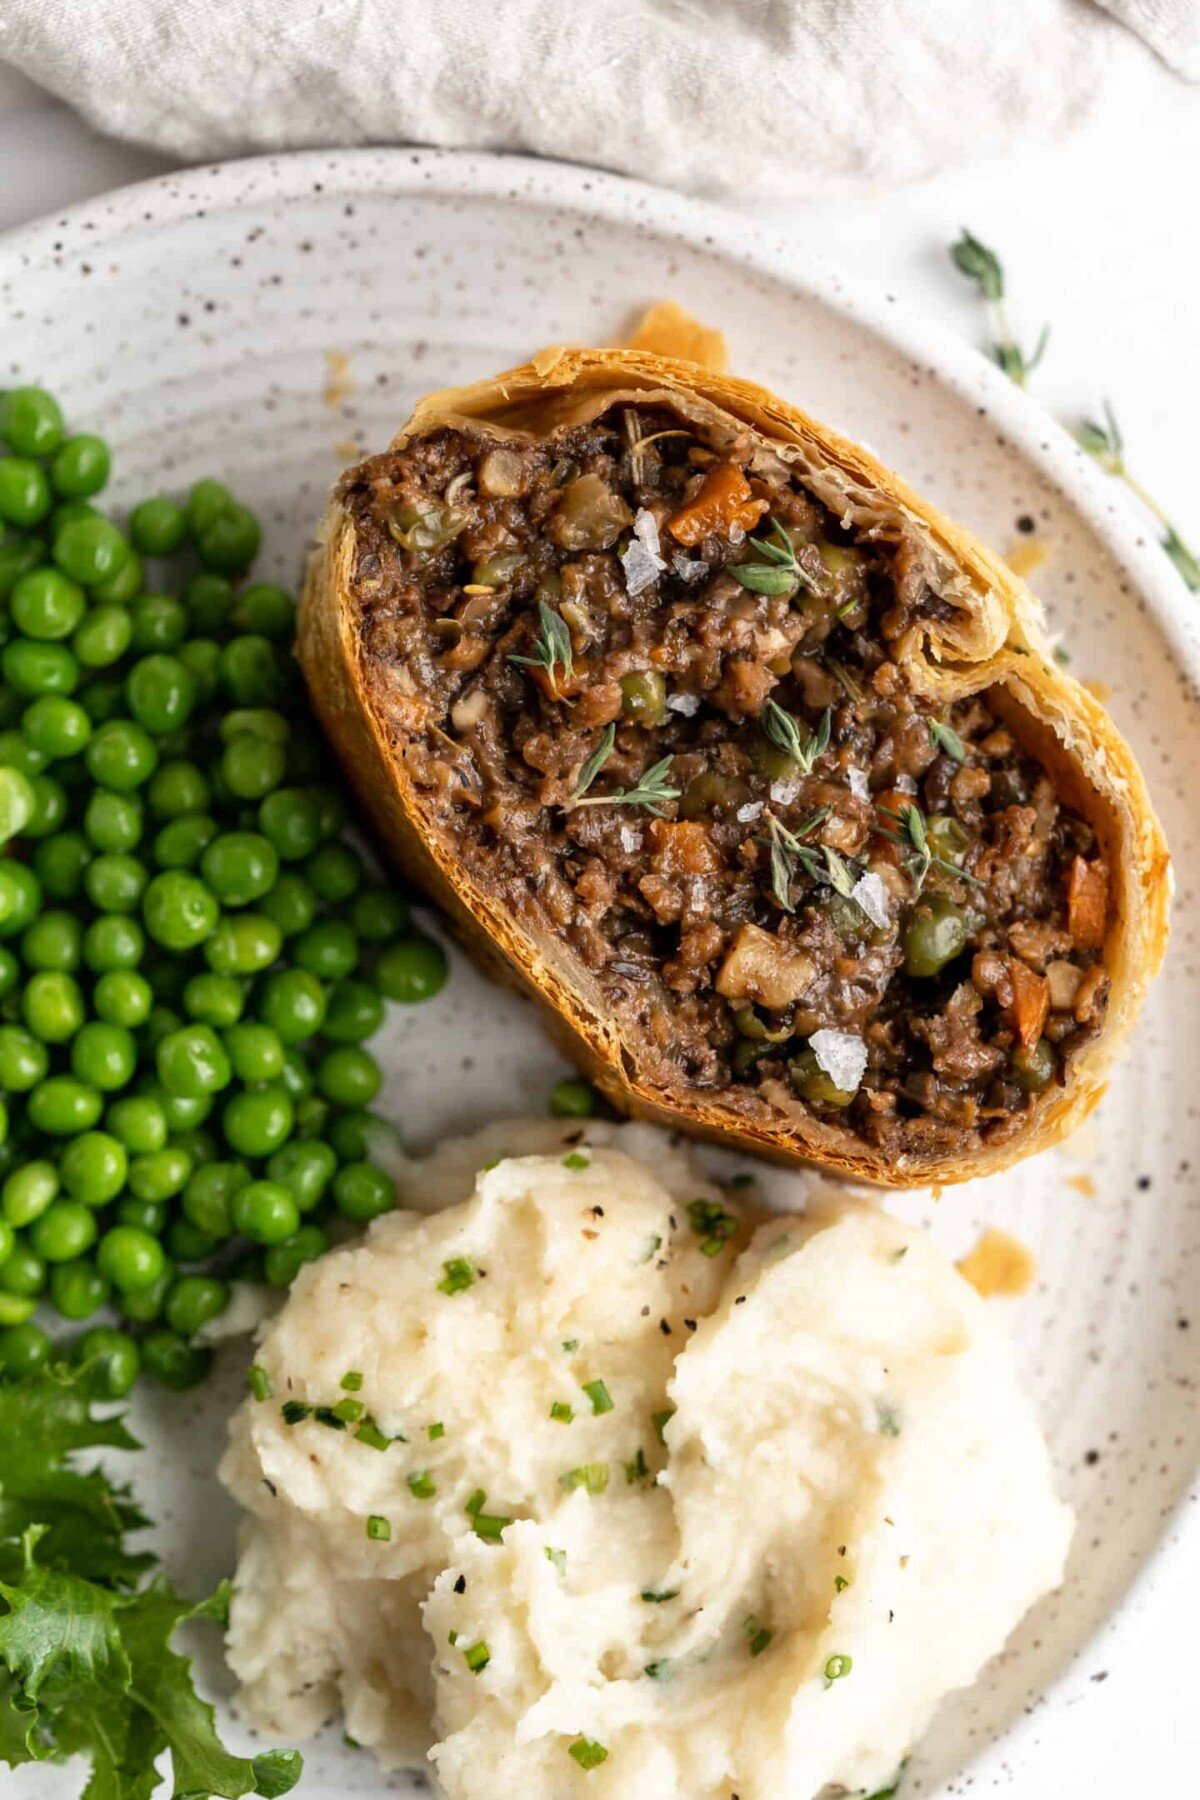 A slice of vegan wellington on a plate next to peas and mashed potatoes